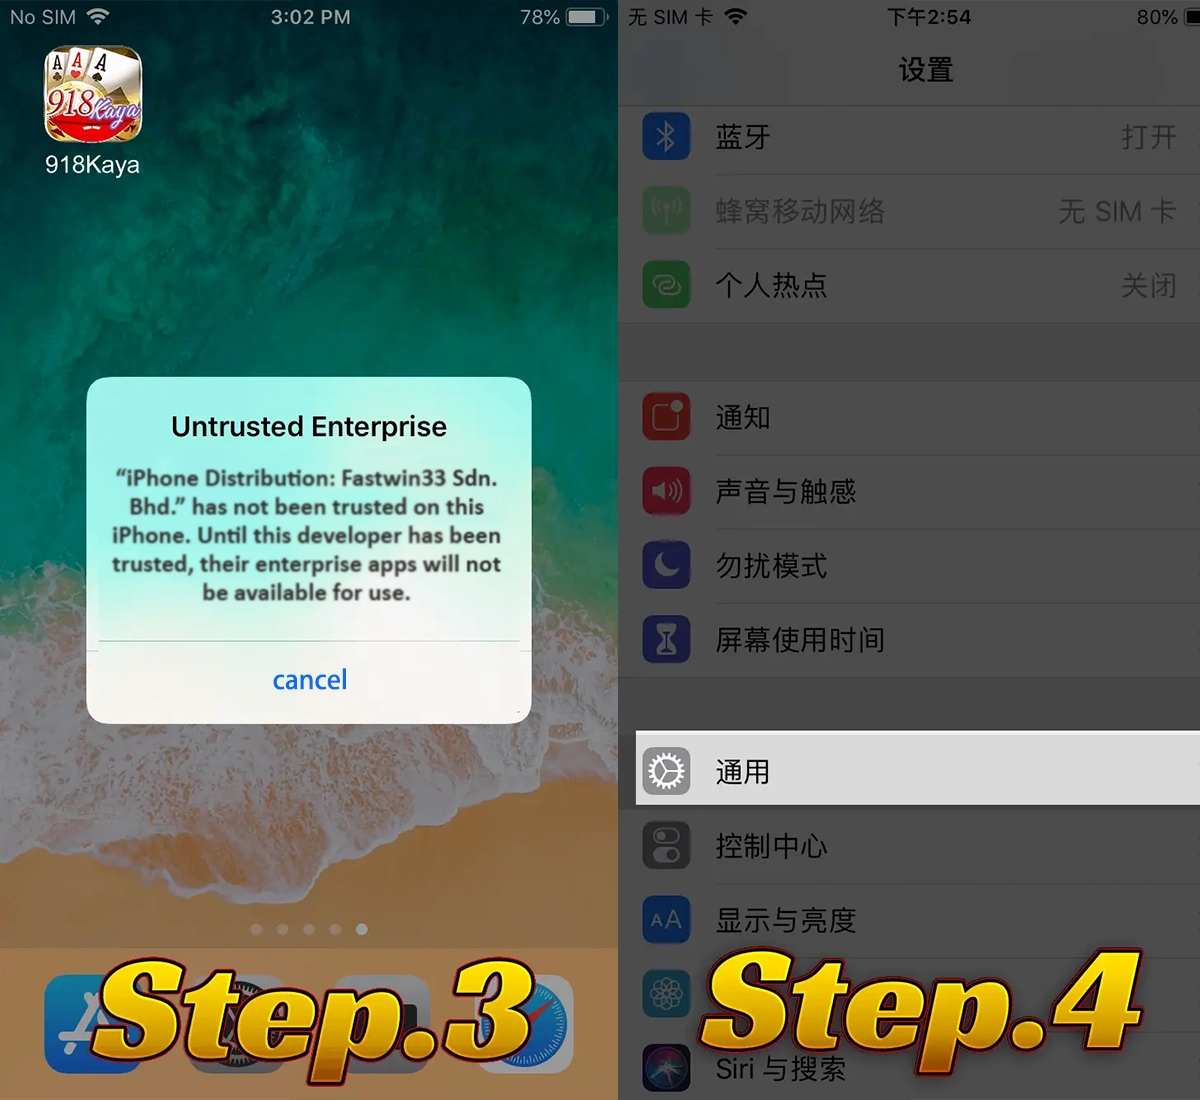 iOS installation step 3 and step 4